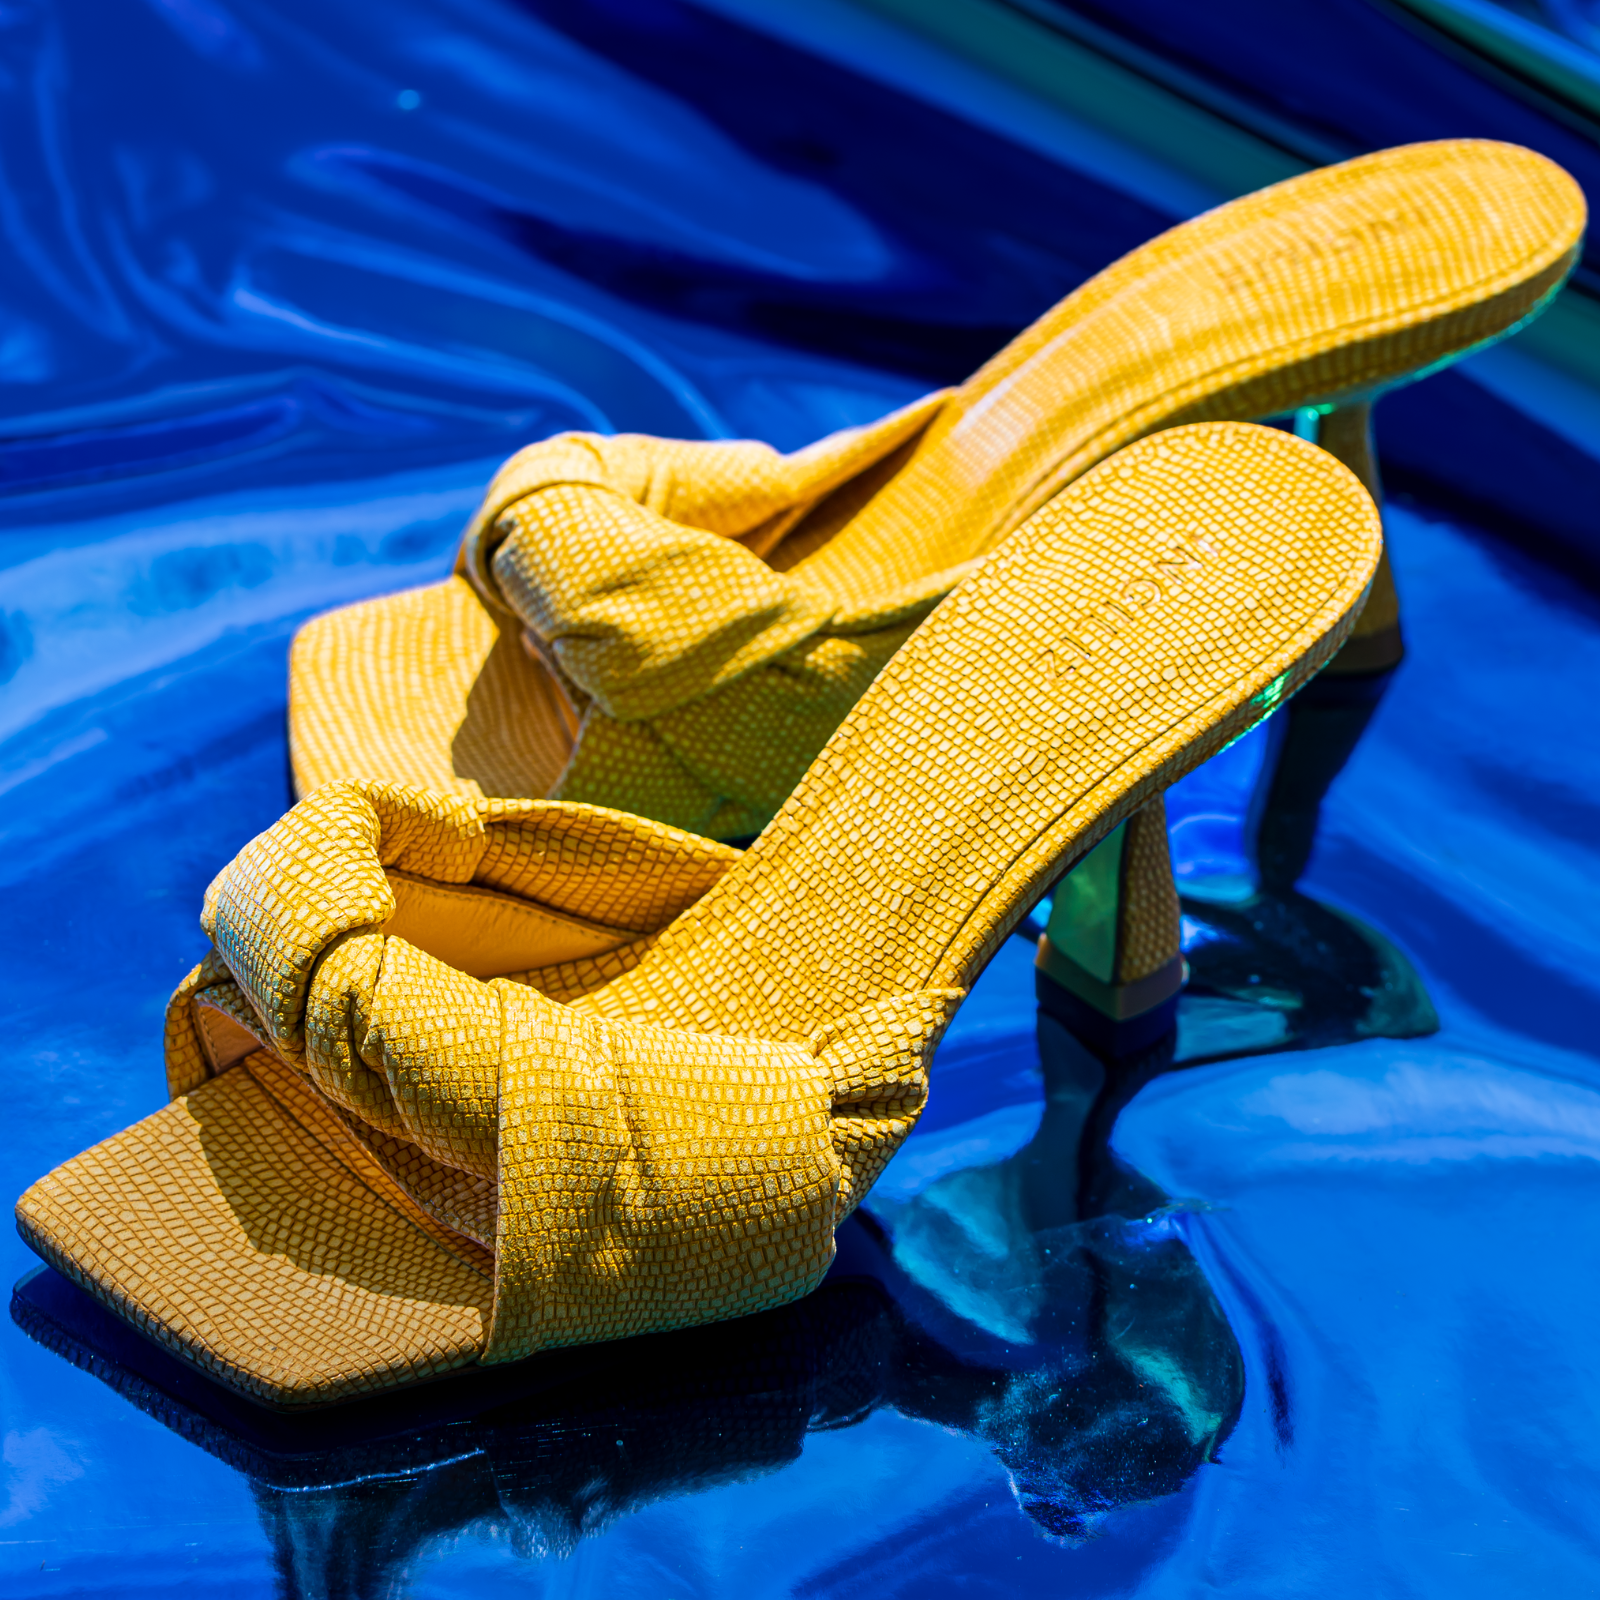 NIA YELLOW LIZZARD EMBOSSED SUEDE LEATHER MULES